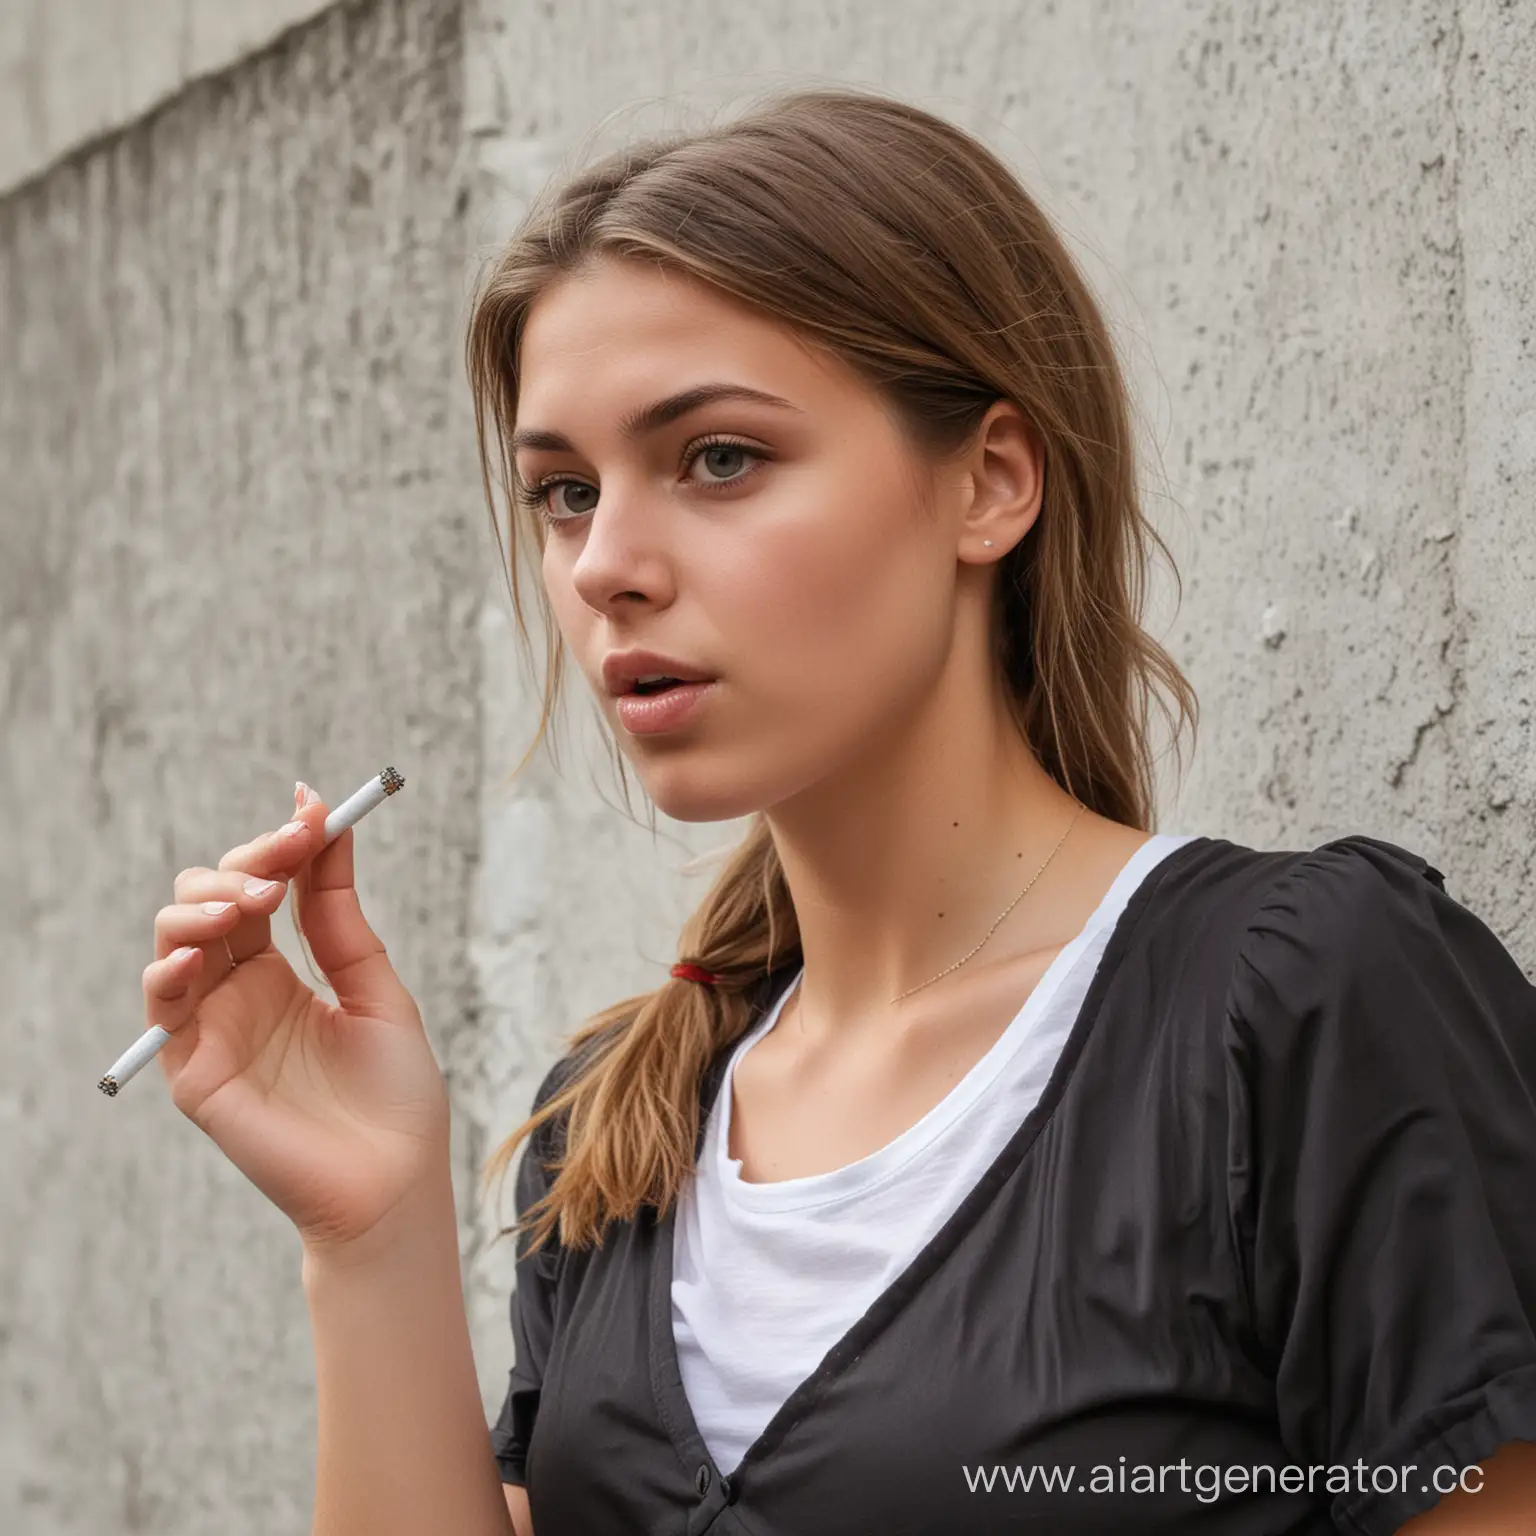 German-Girl-Throwing-a-Cigarette-Outdoors-in-Urban-Setting